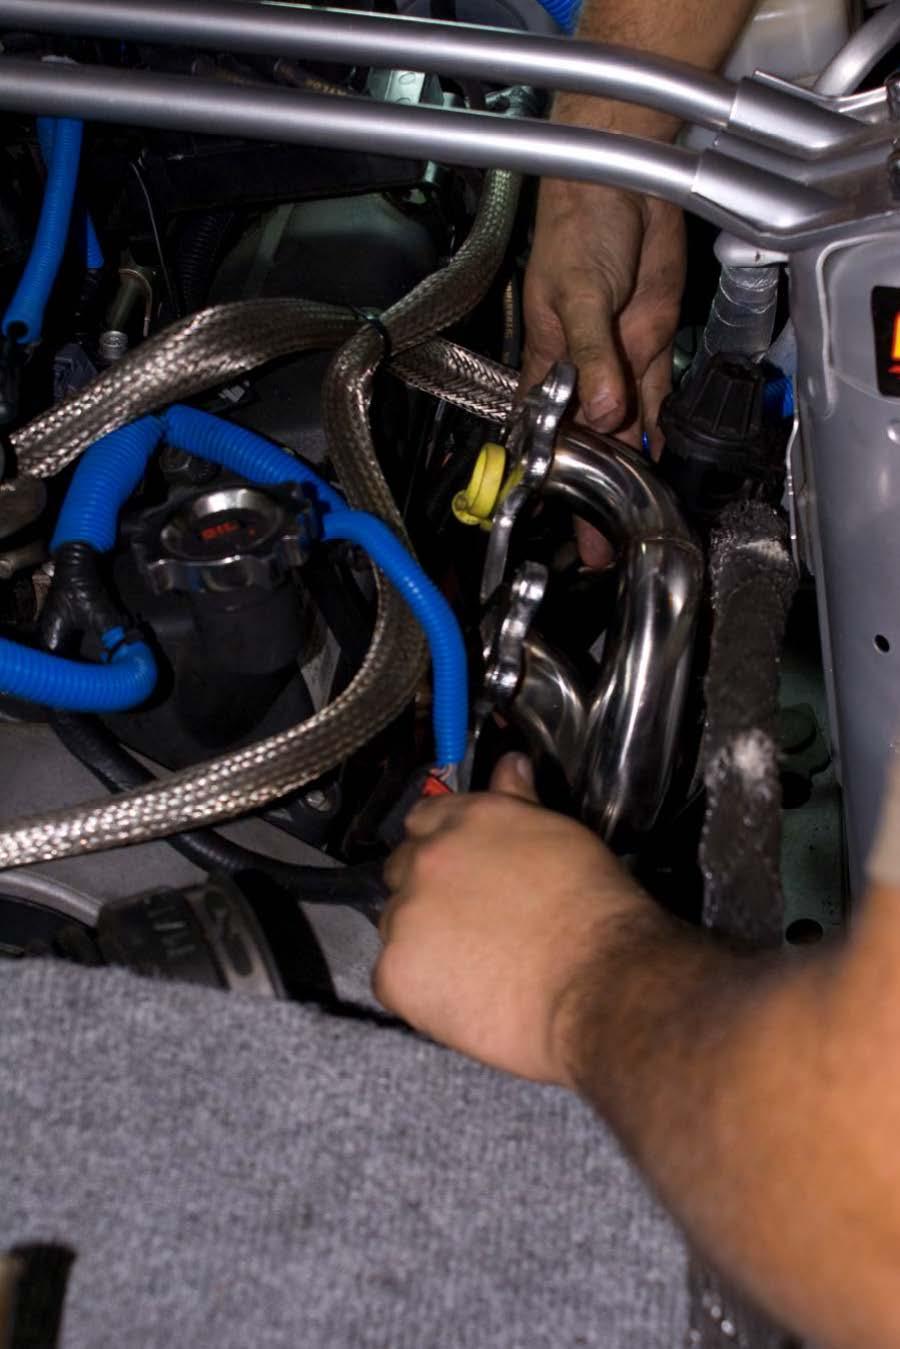 Installation of new Driver Side Header: -Carefully place one of the supplied exhaust gaskets on the engine block exhaust manifold studs.